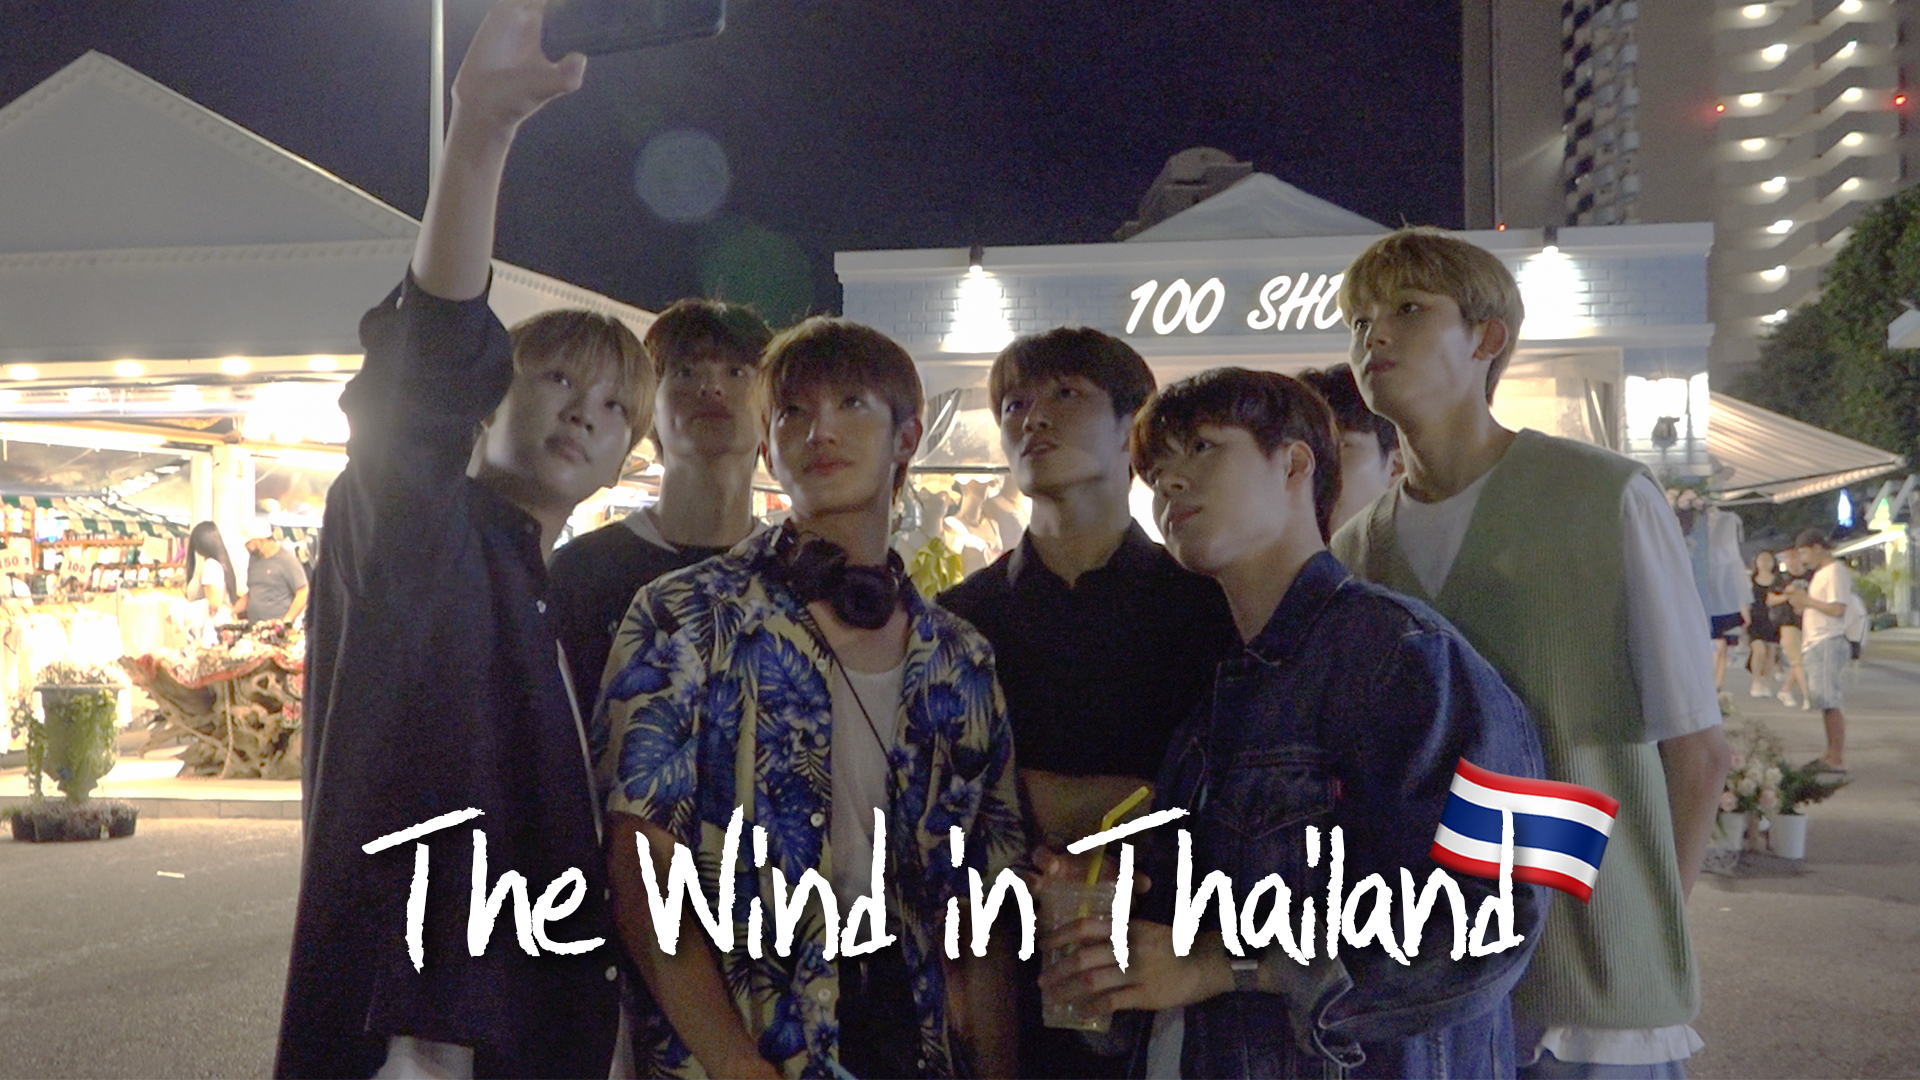 The Wind in Thailand V-log